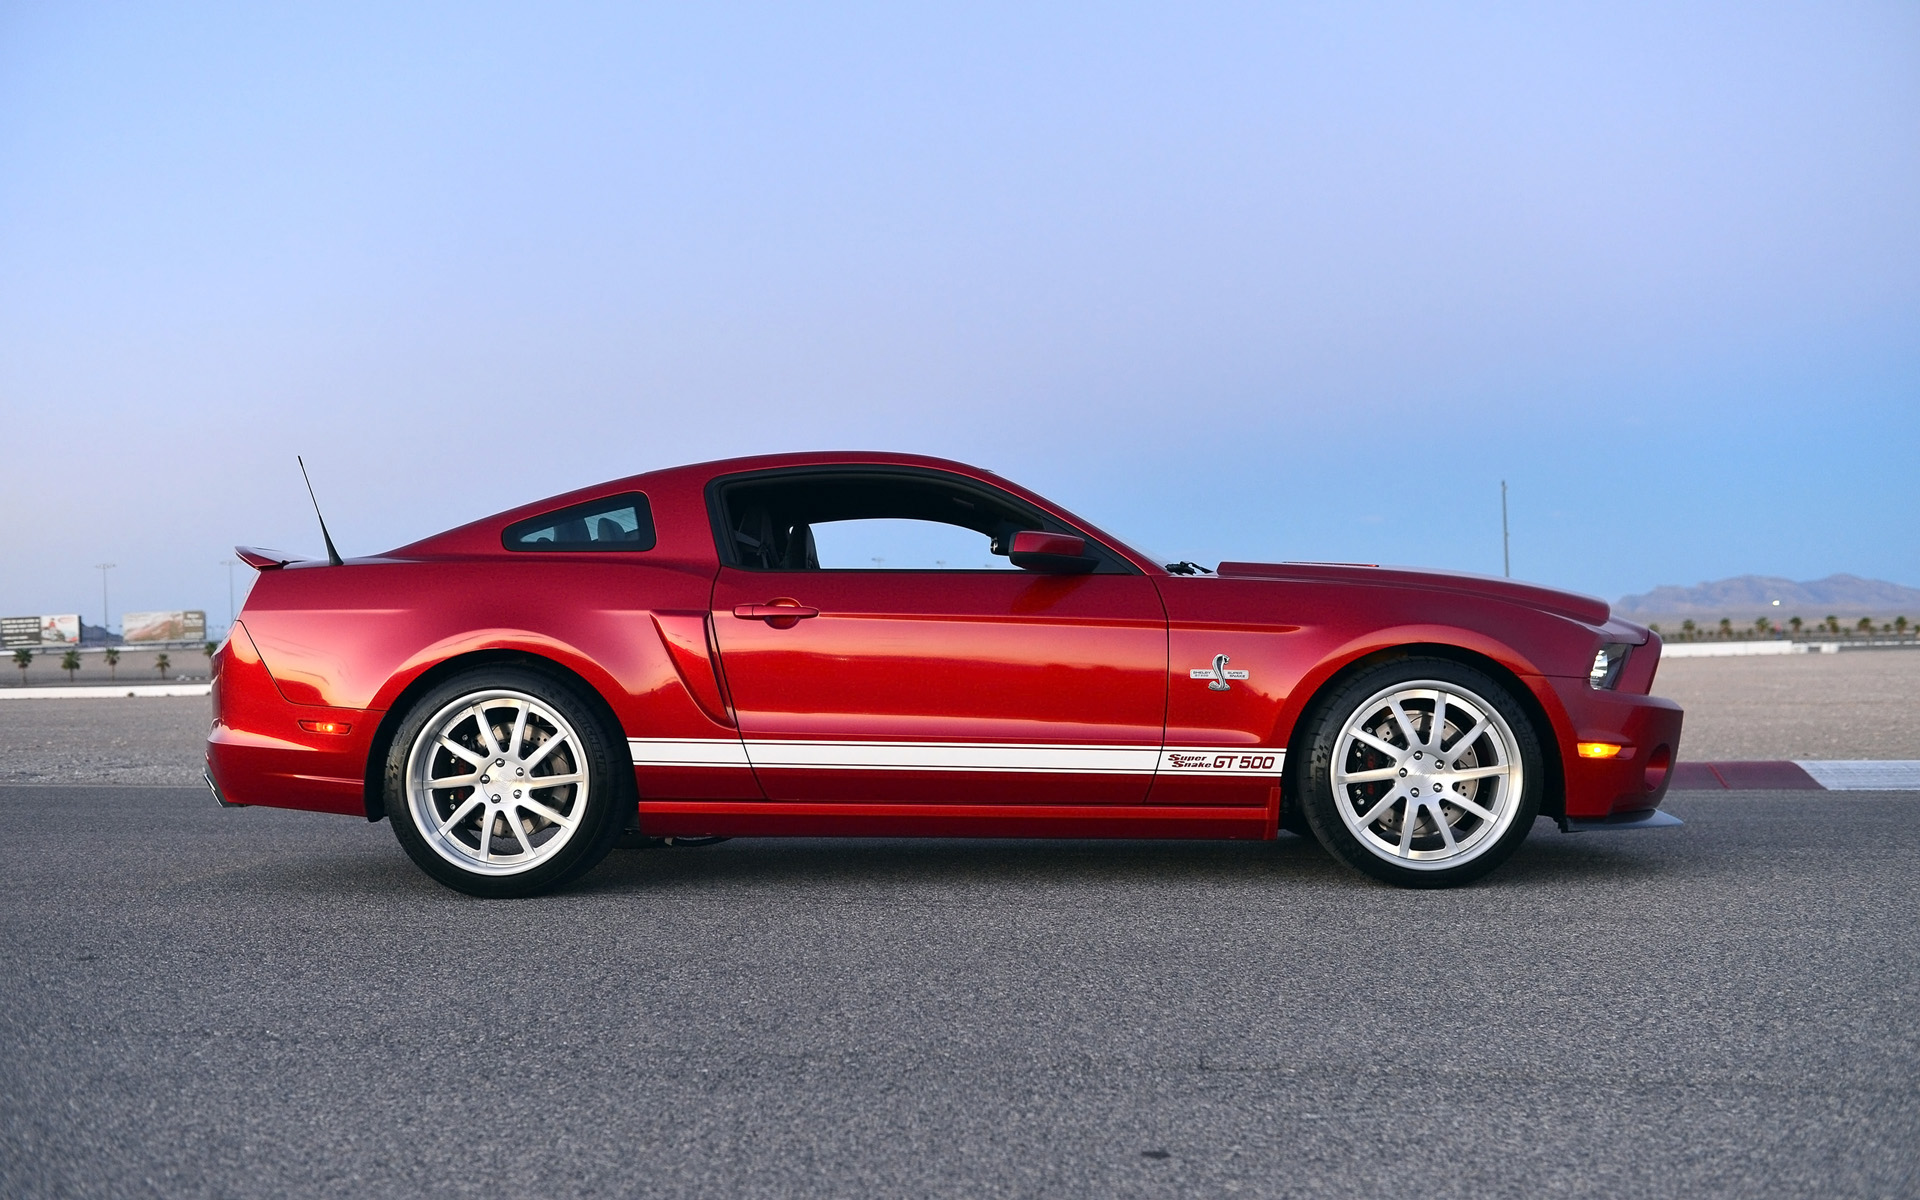 2013, Shelby, Gt500, Super, Snake, Muscle, Supercar, Ford, Mustang Wallpaper